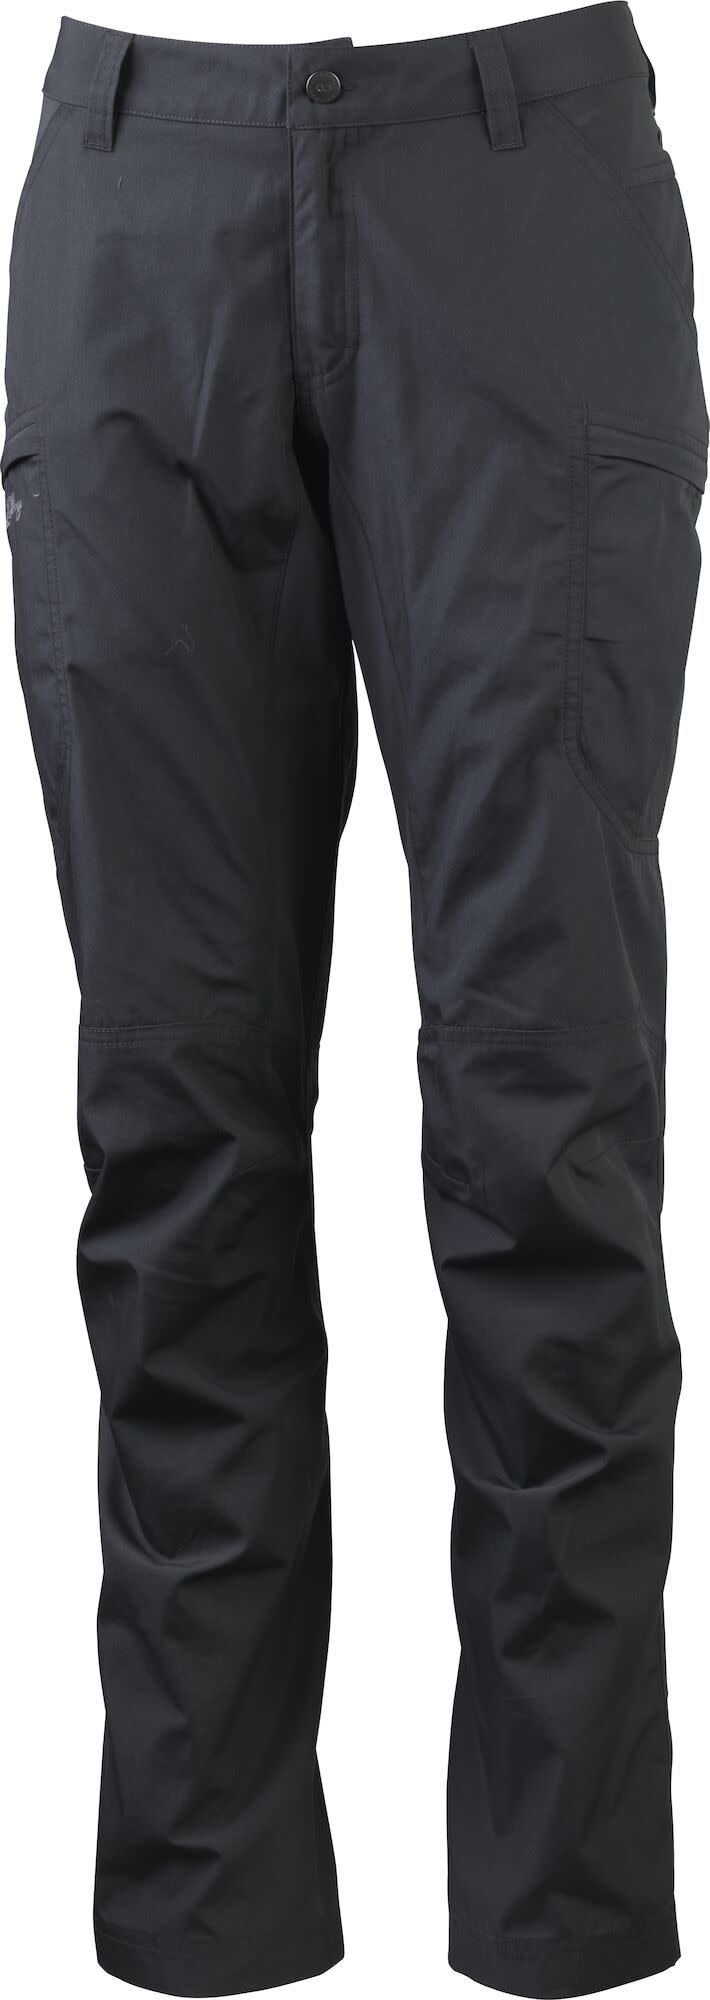 Lundhags Women's Nybo Pant Charcoal Lundhags